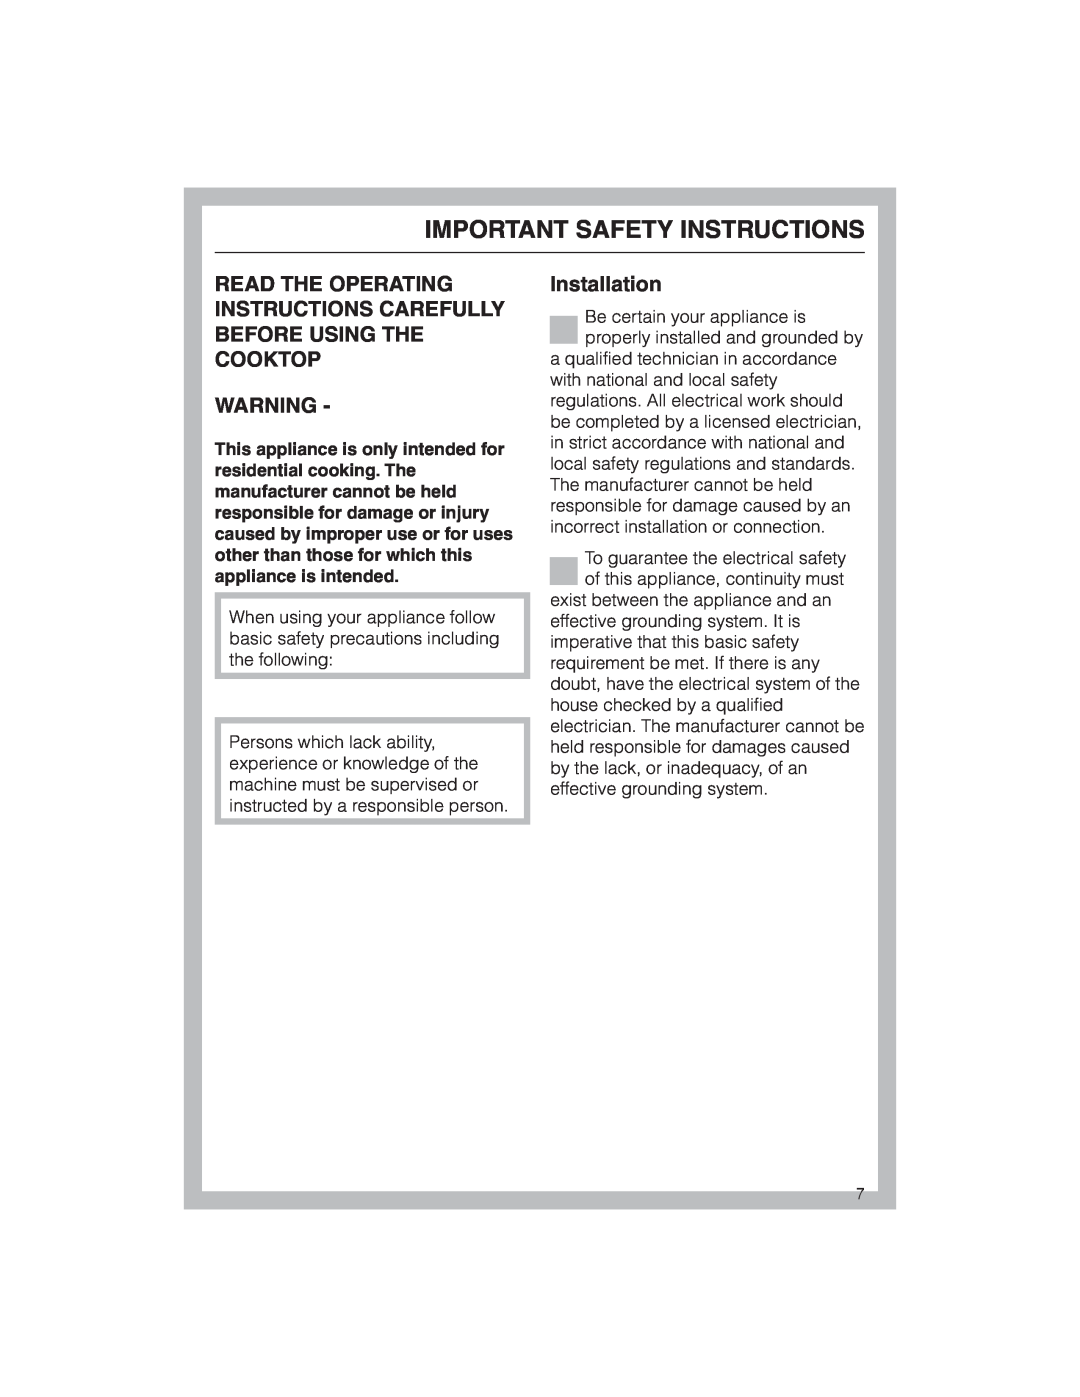 Miele KM 5773 installation instructions Important Safety Instructions, Installation 